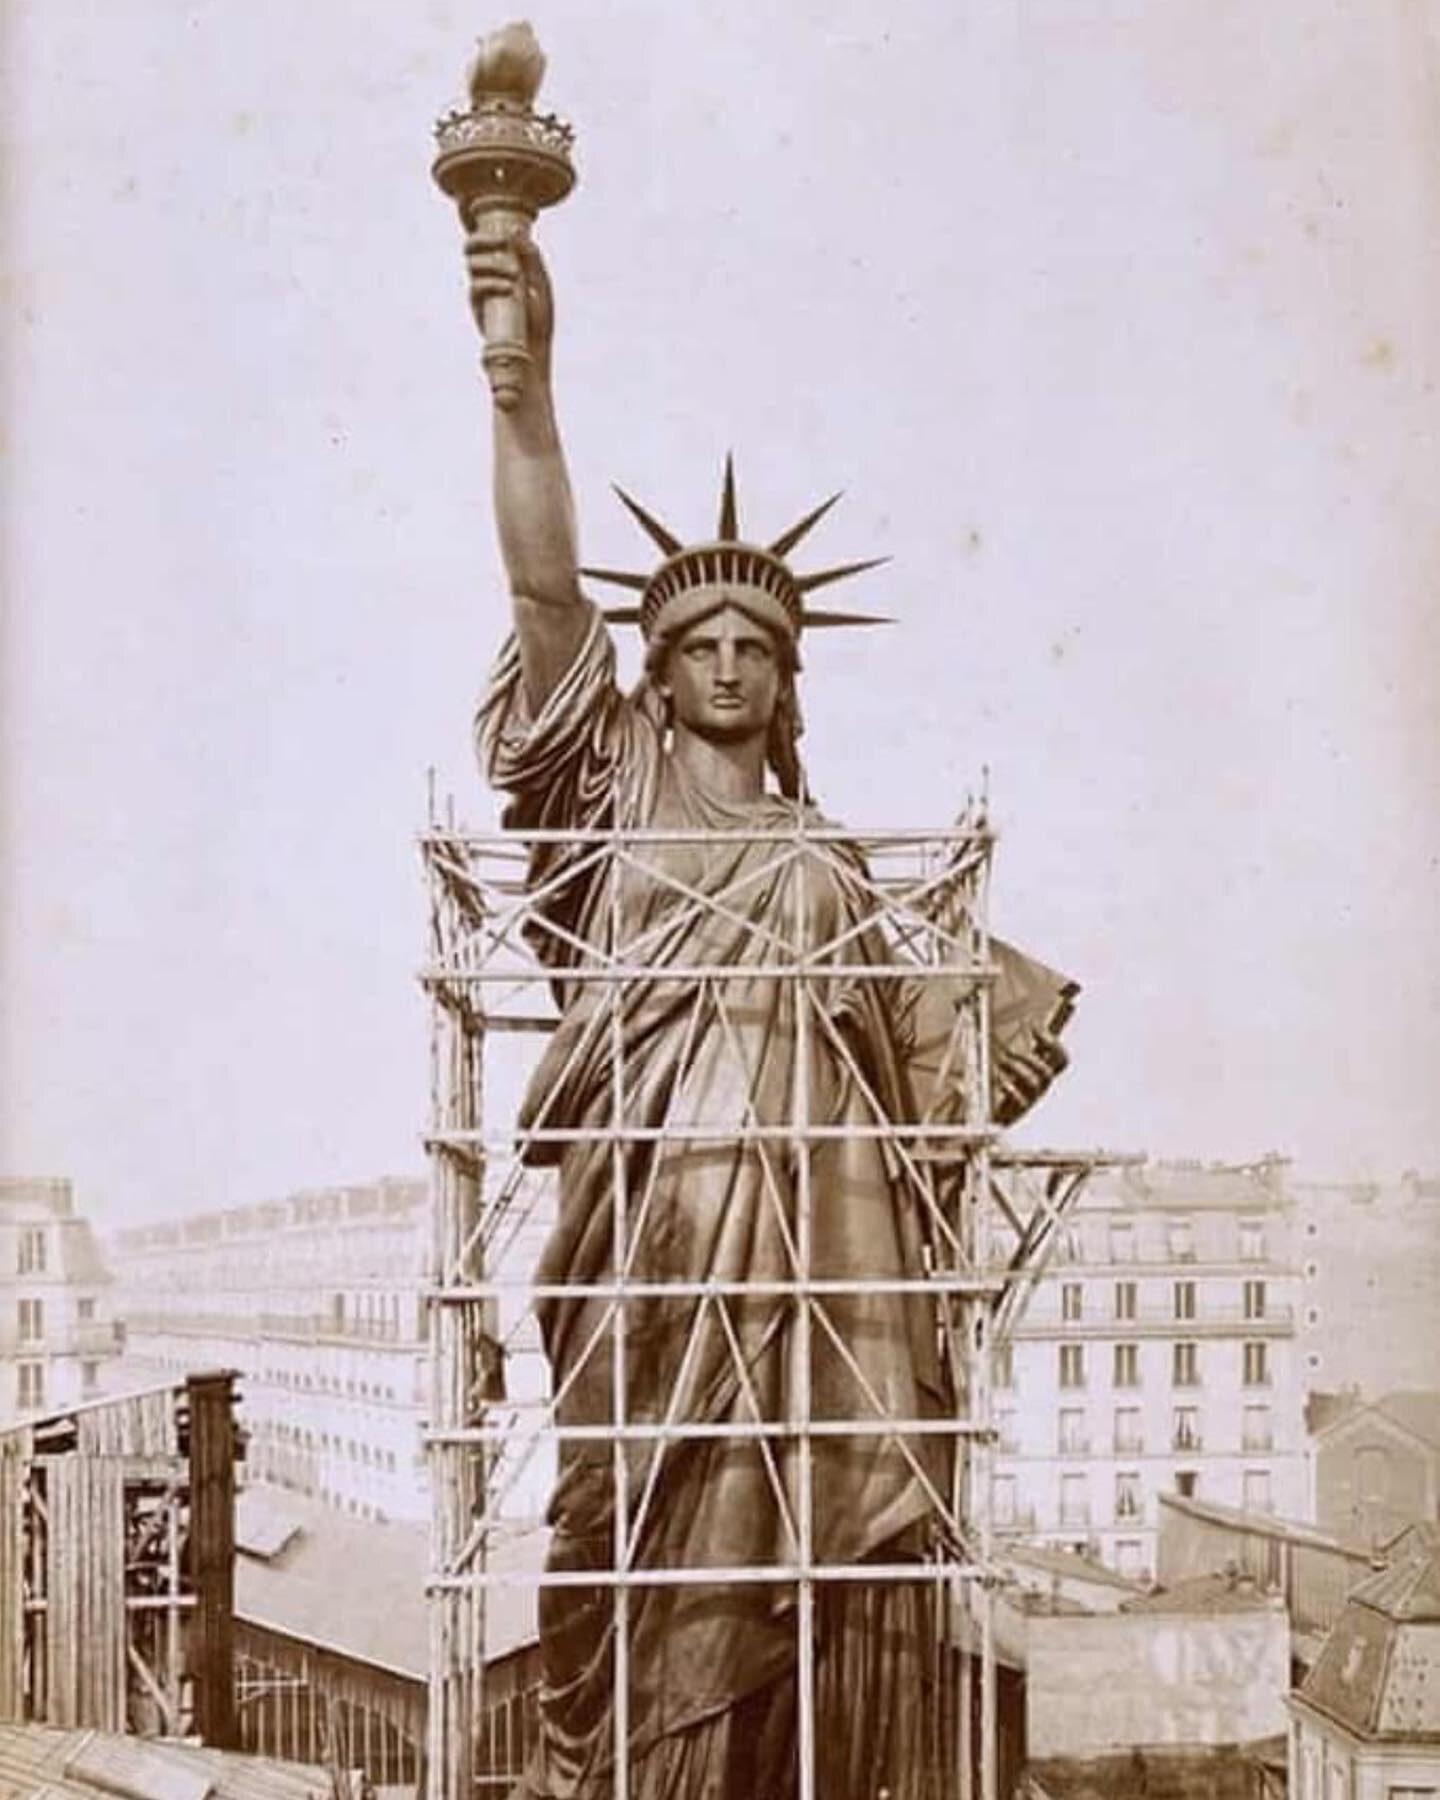 Happy Bastille day! 🍾🎊
🥐🥖🇫🇷 

Here is Lady Liberty in Paris in 1885 before setting sail for New York .